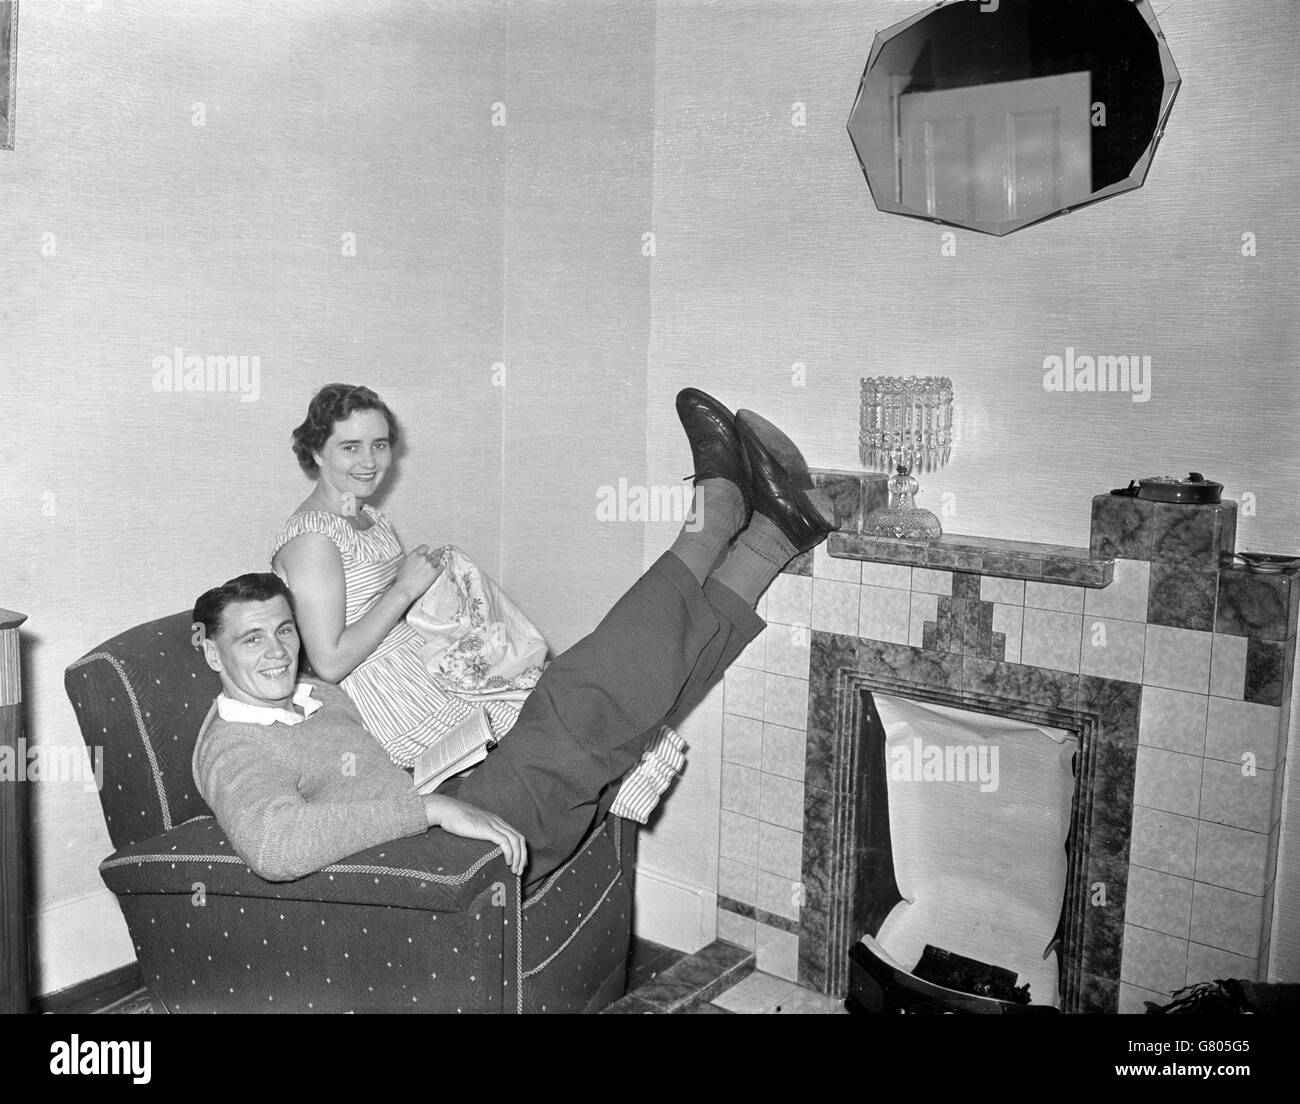 Inside Black and White Stock Photos & Images - Alamy